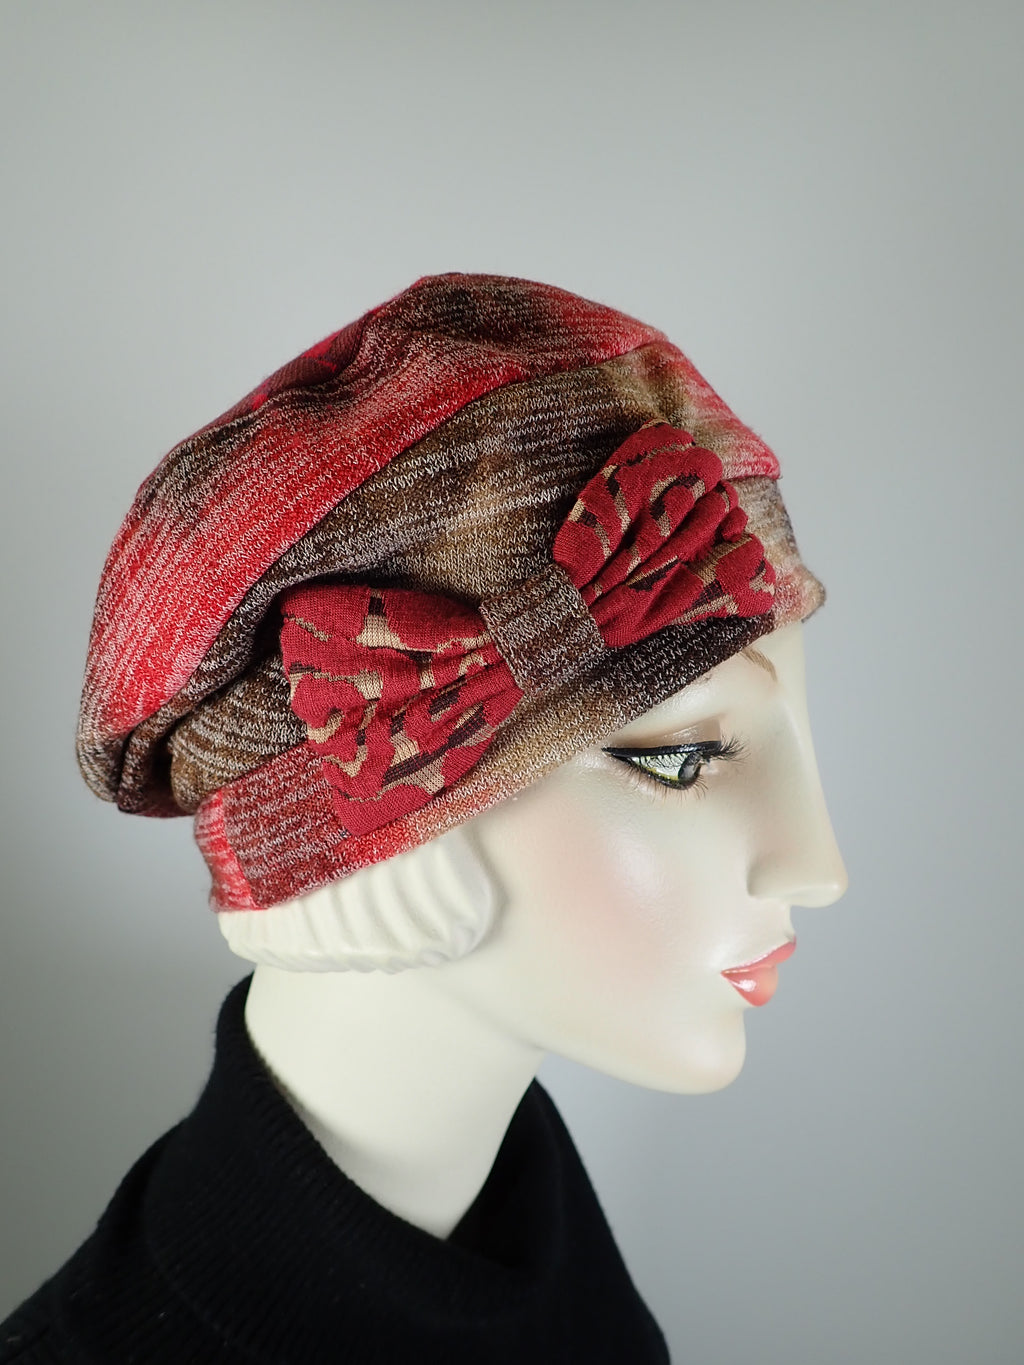 Womens Slouchy Beret. Knit red brown Hat. Slouch Eco friendly Hat. Boho chic casual hat. Ladies travel hat. Stylish fabric hat.